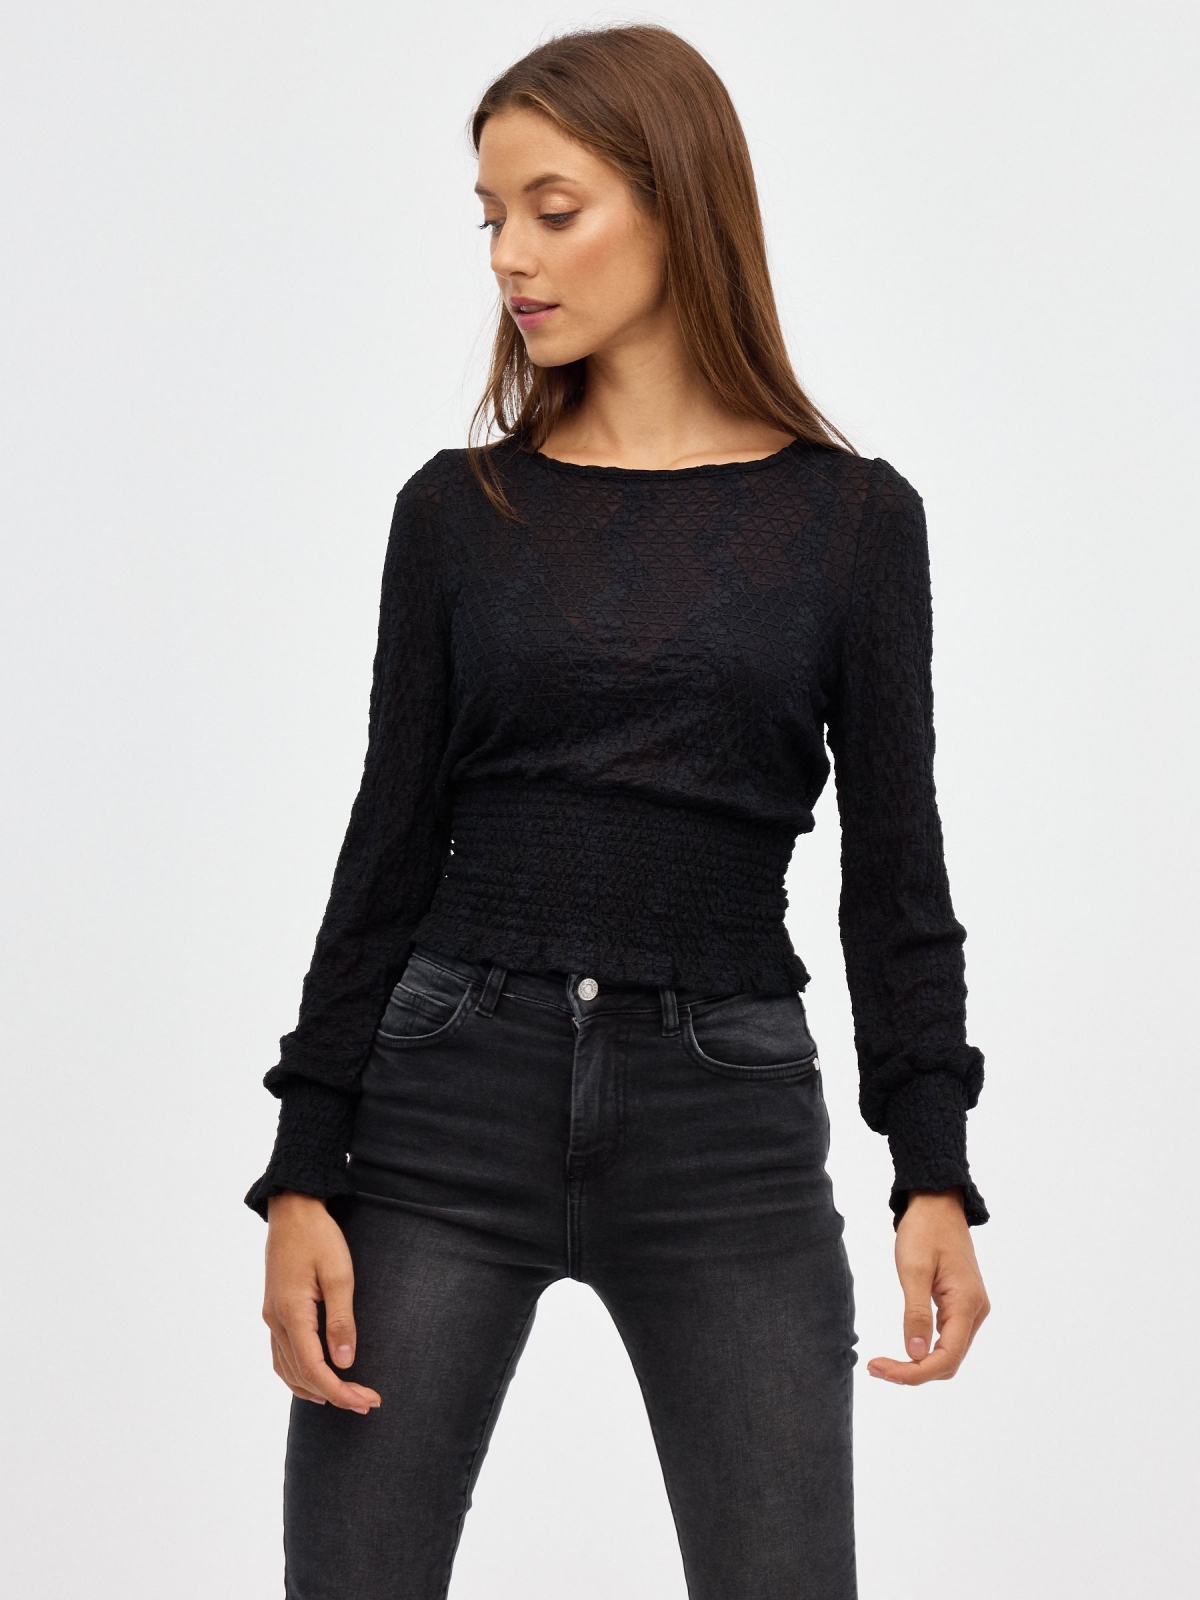 Textured lace shirt black middle front view